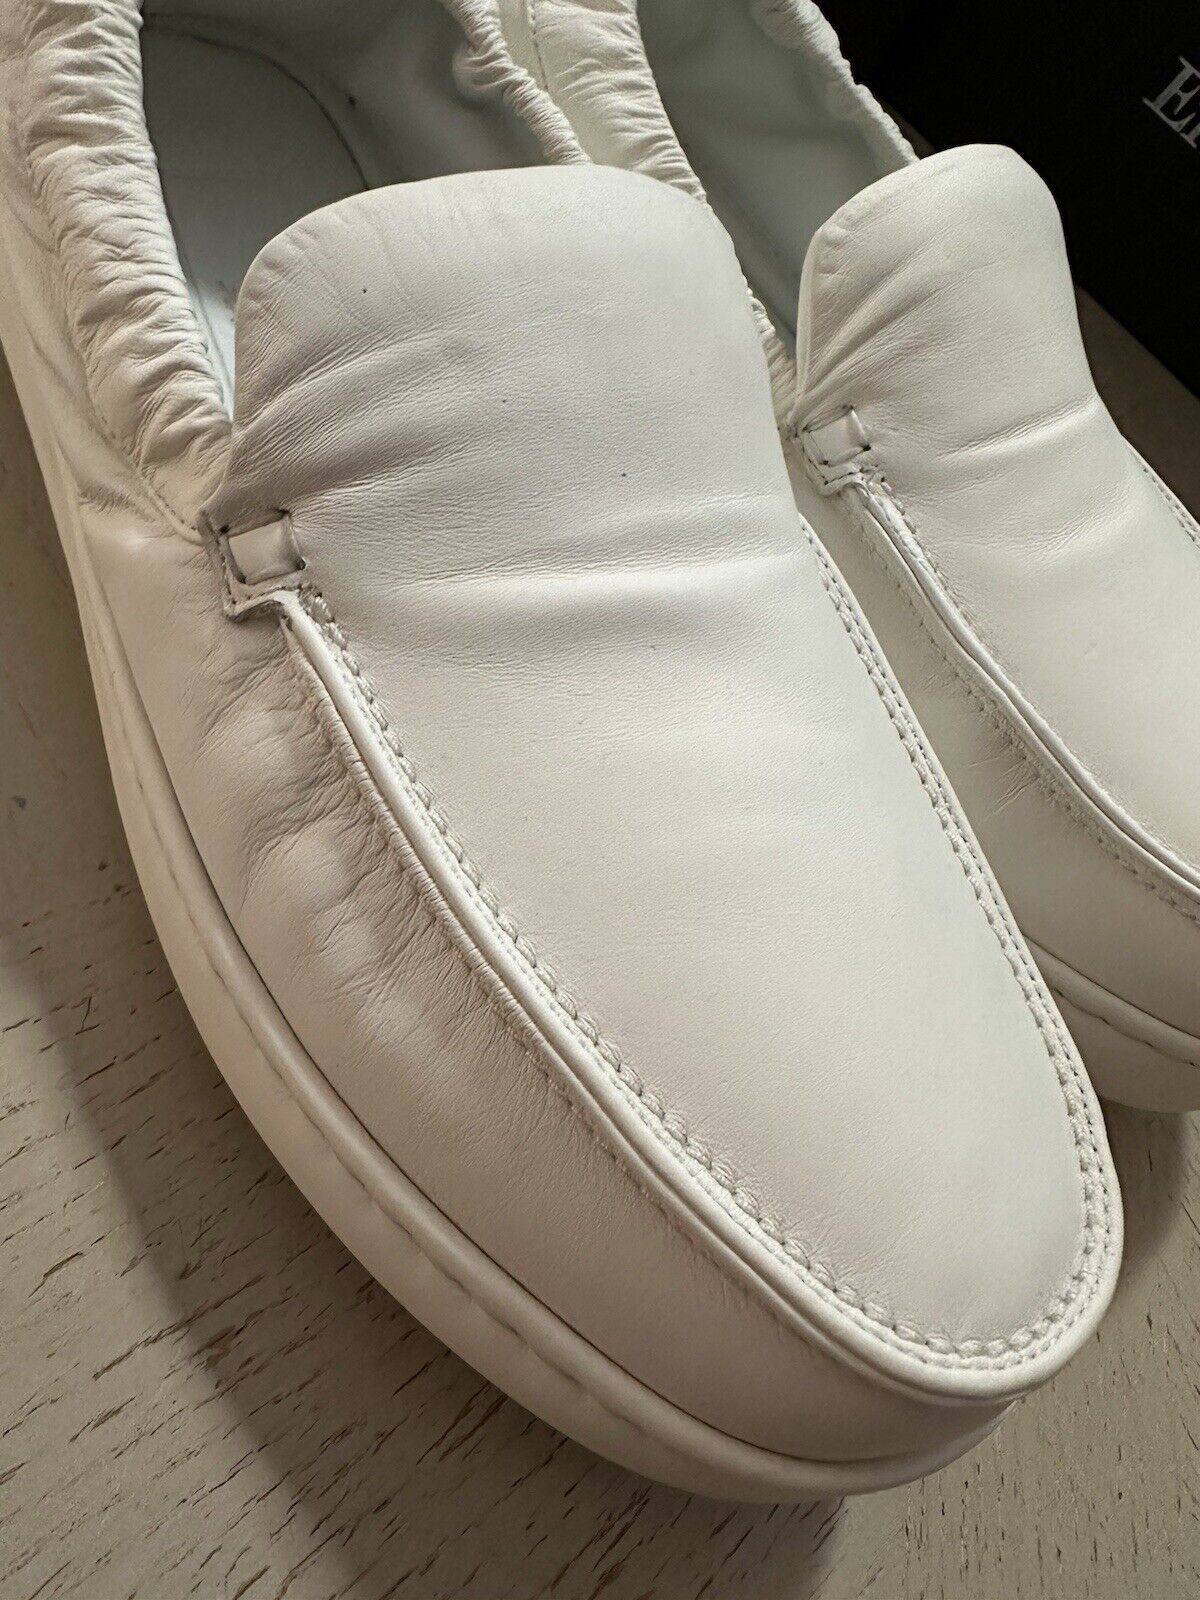 Ermenegildo Zegna Couture Leather Slippers Sneakers Shoes White 10 US New $860